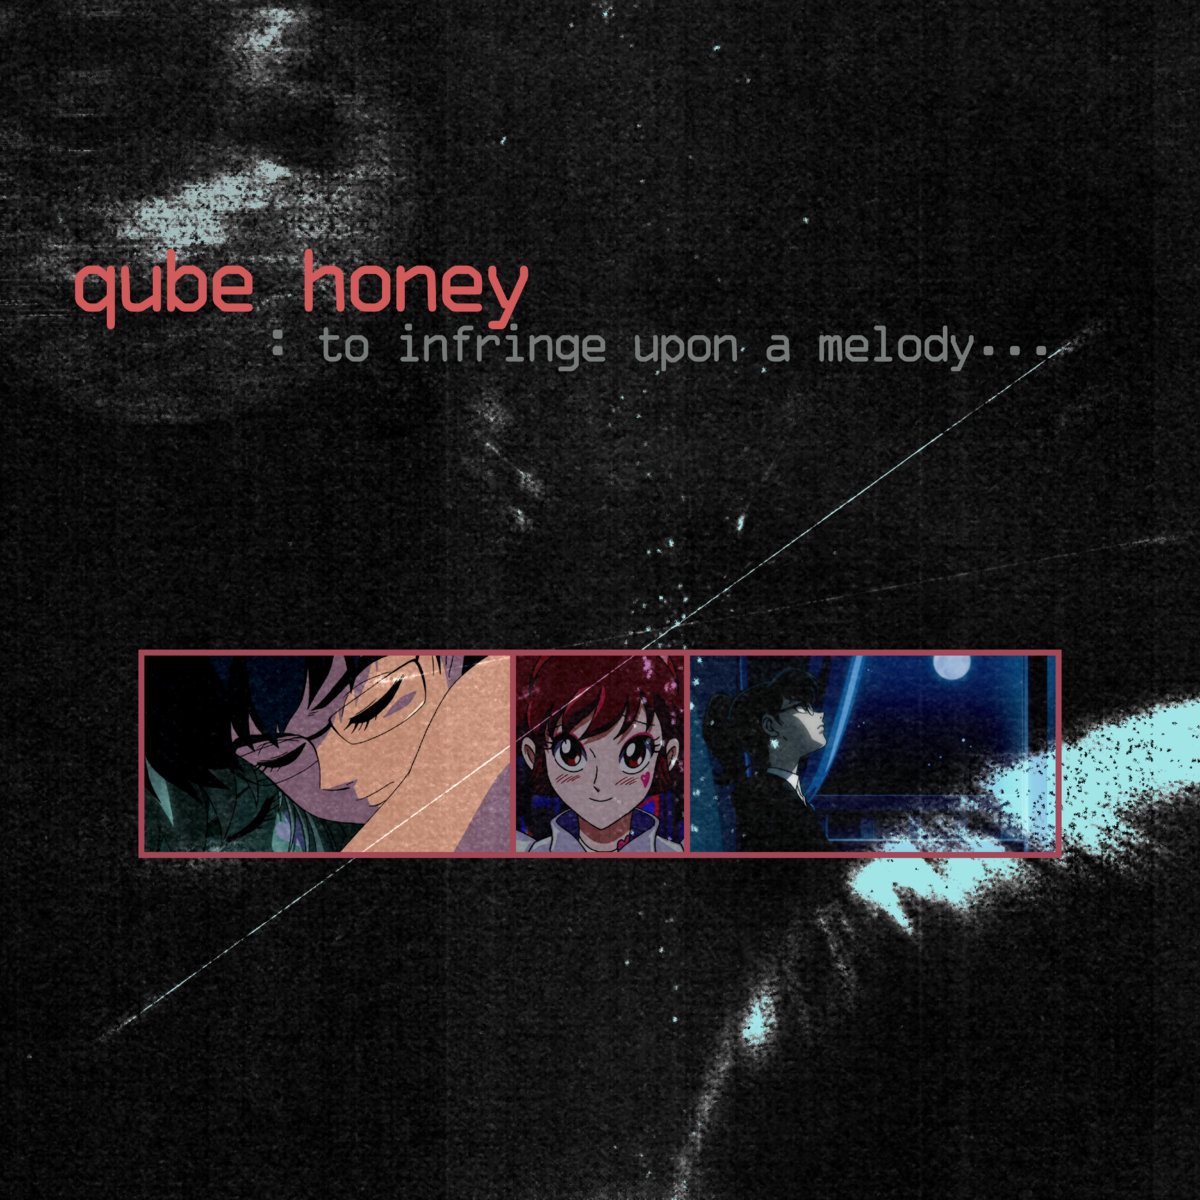 Download Grunge Aesthetic Purple Anime 90s Wallpaper | Wallpapers.com